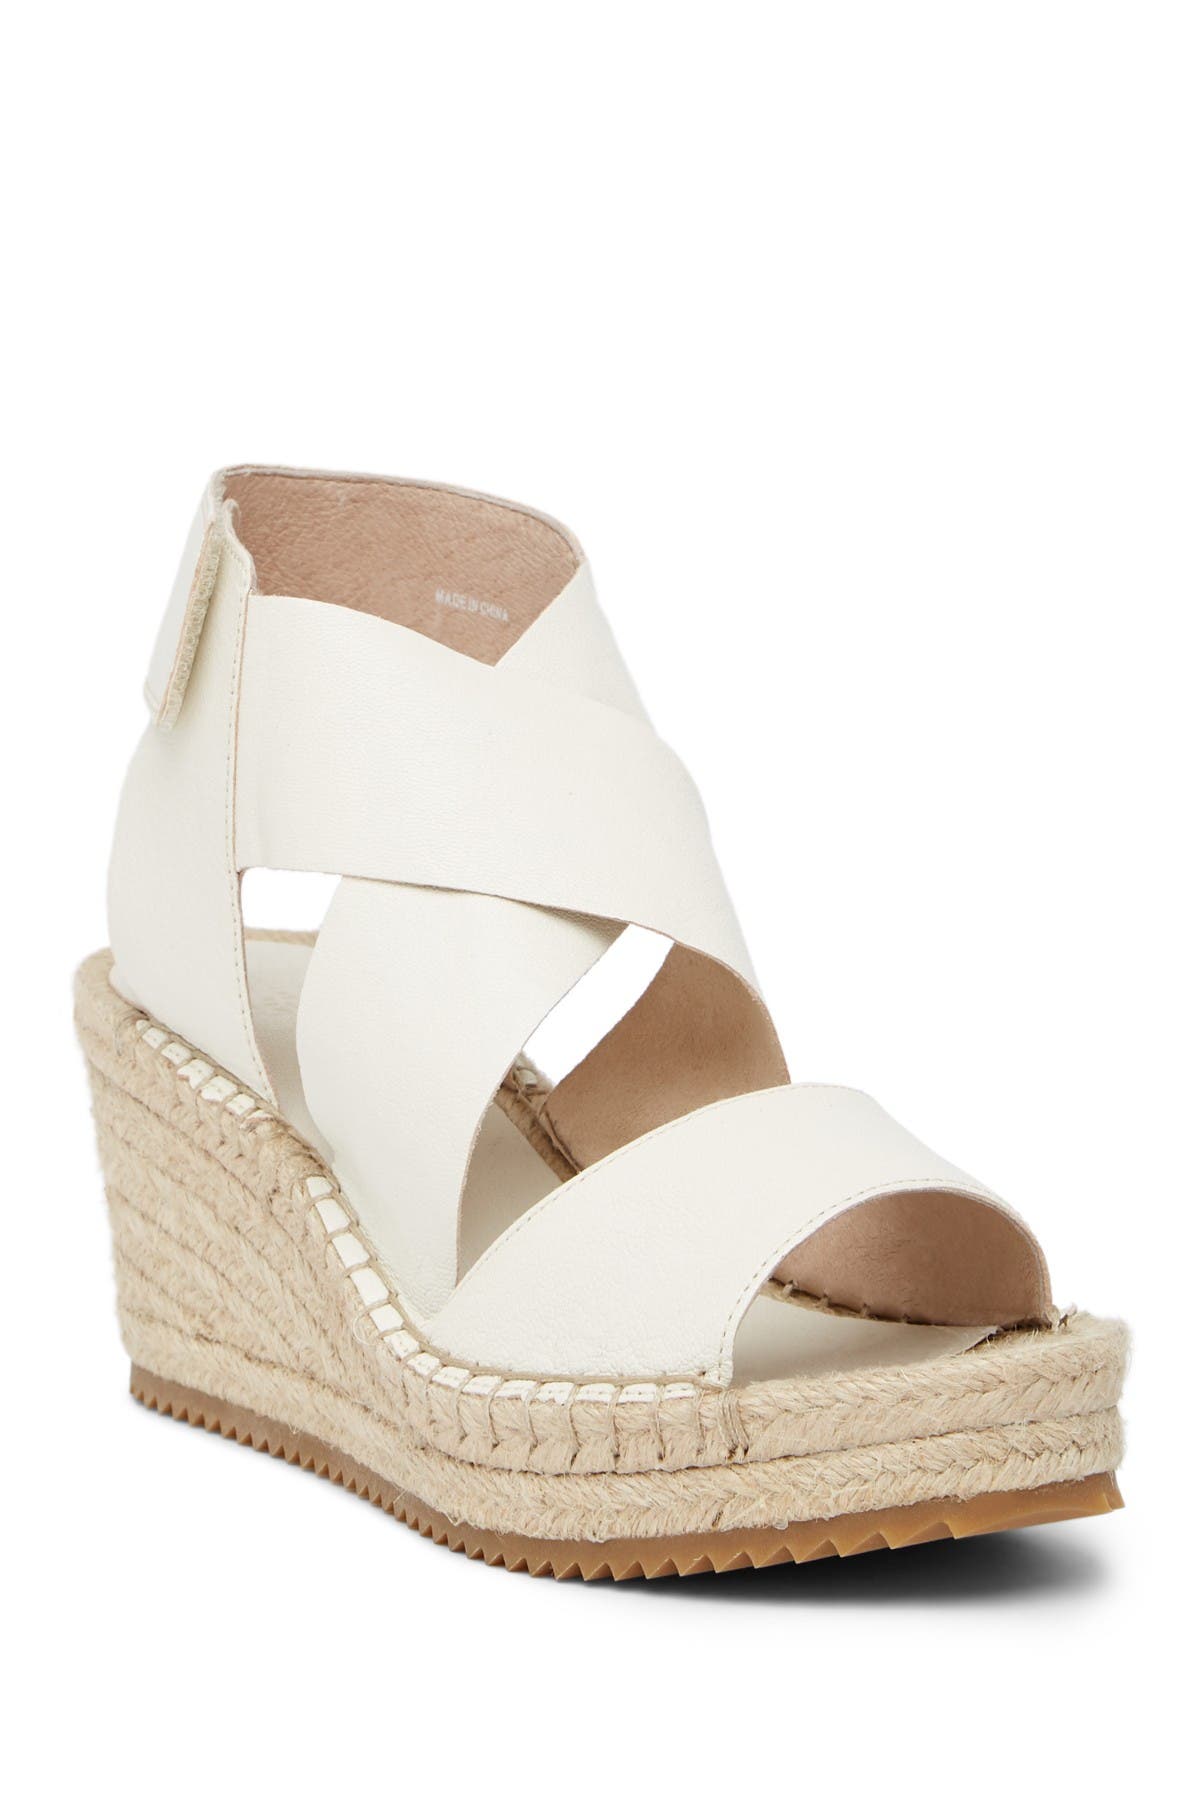 eileen fisher willow wedge